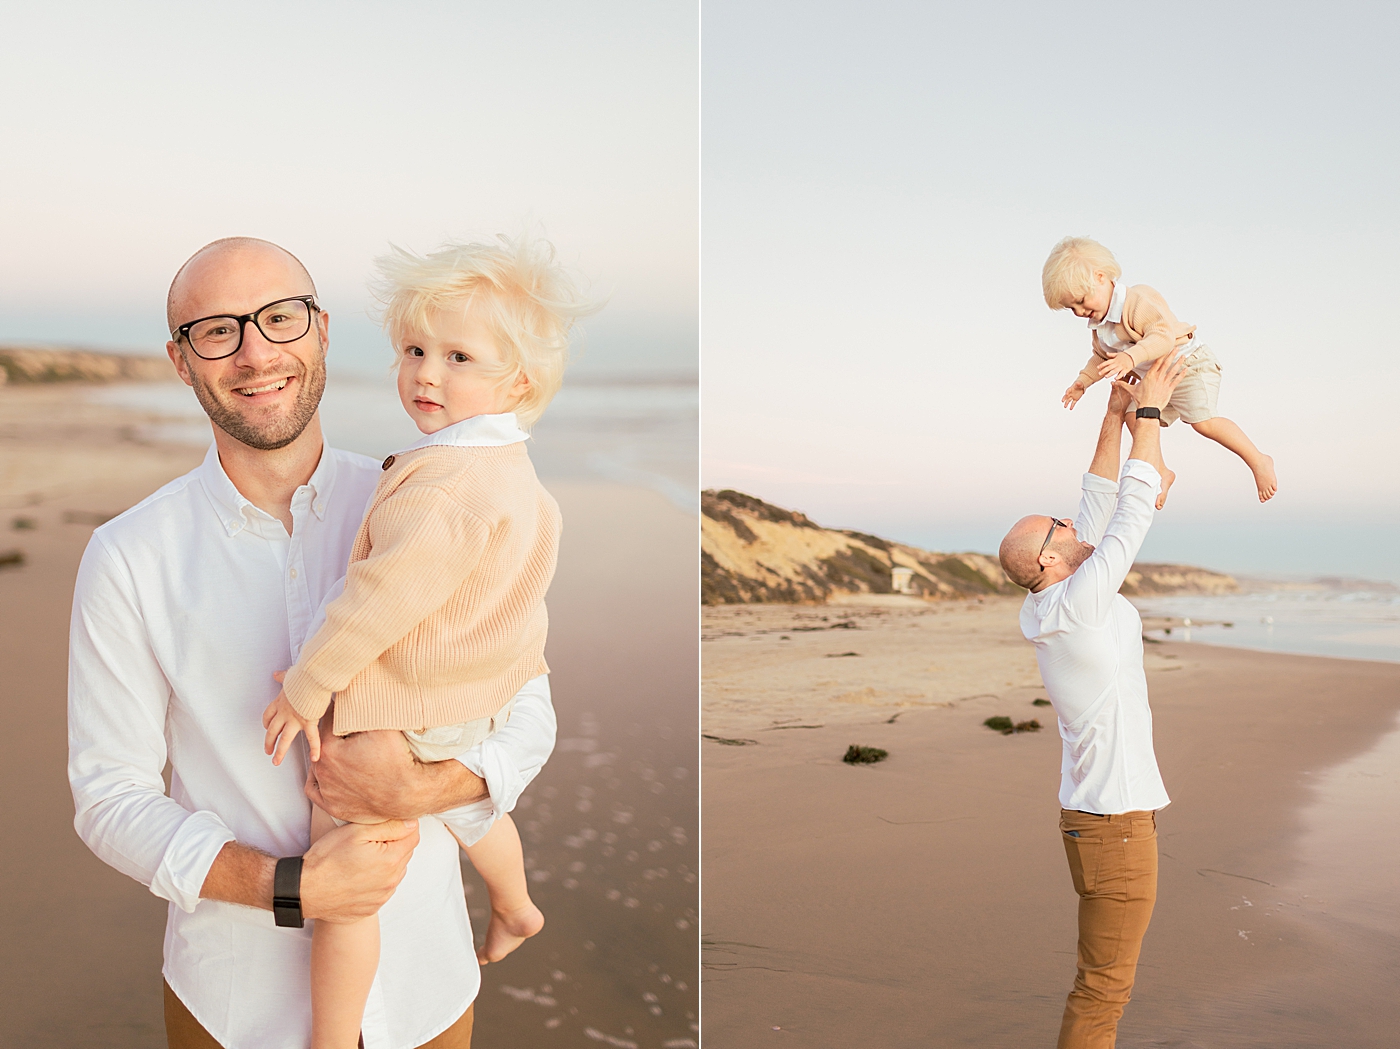 during their Orange County Maternity Session | Image by Halleigh Hill 